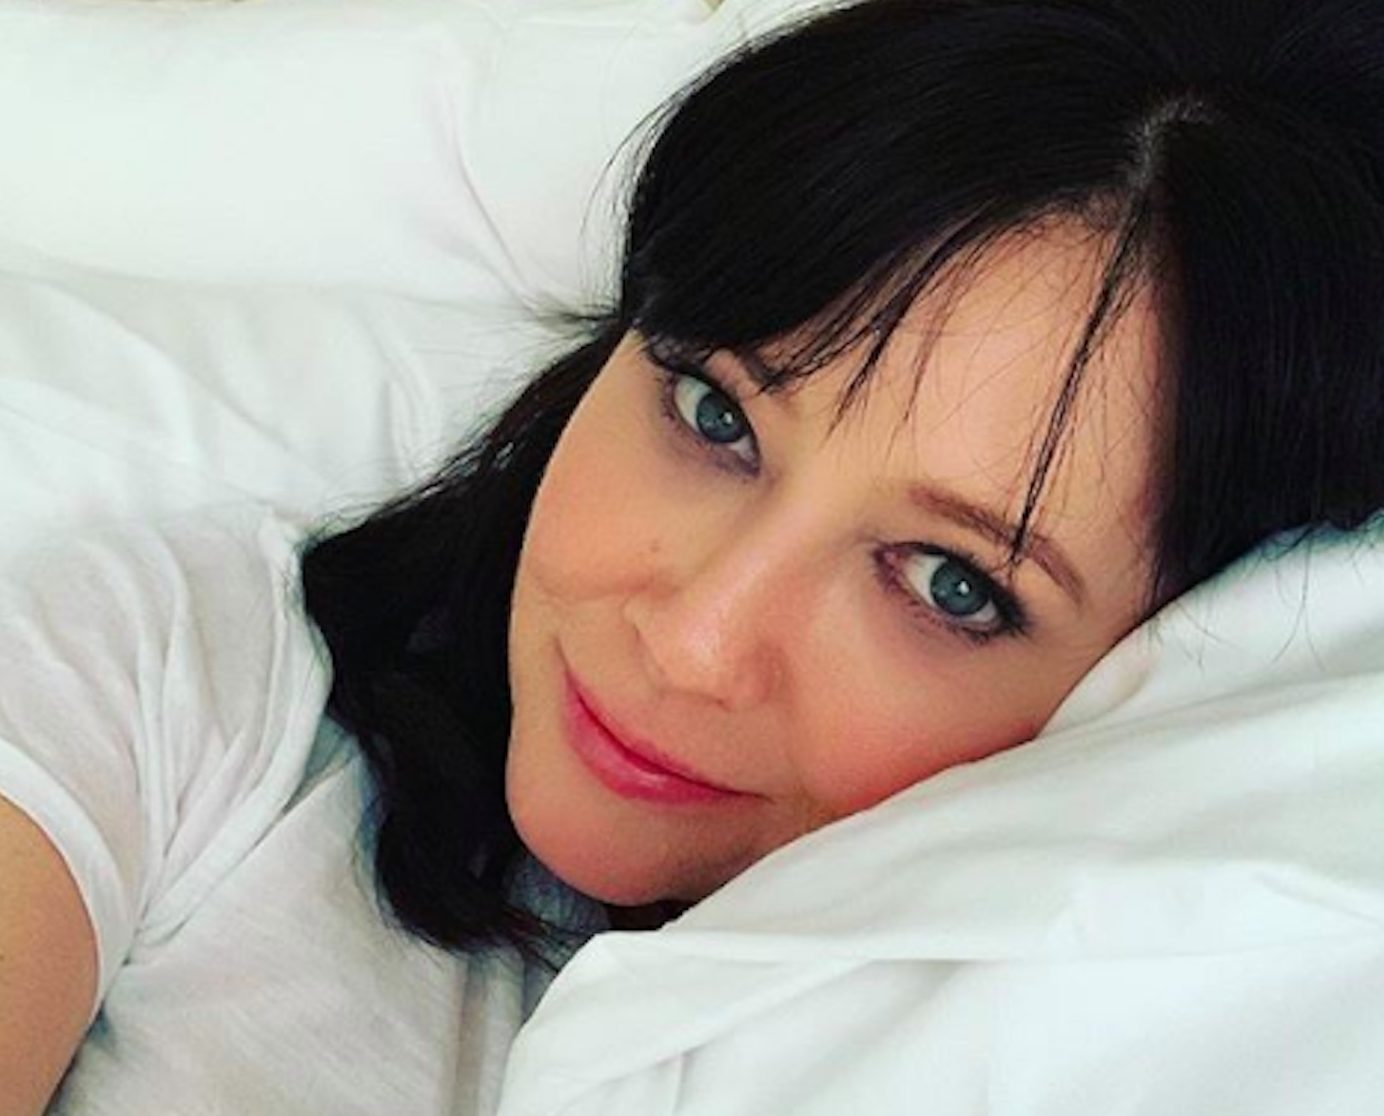 Shannen Doherty laying in bed in a selfie